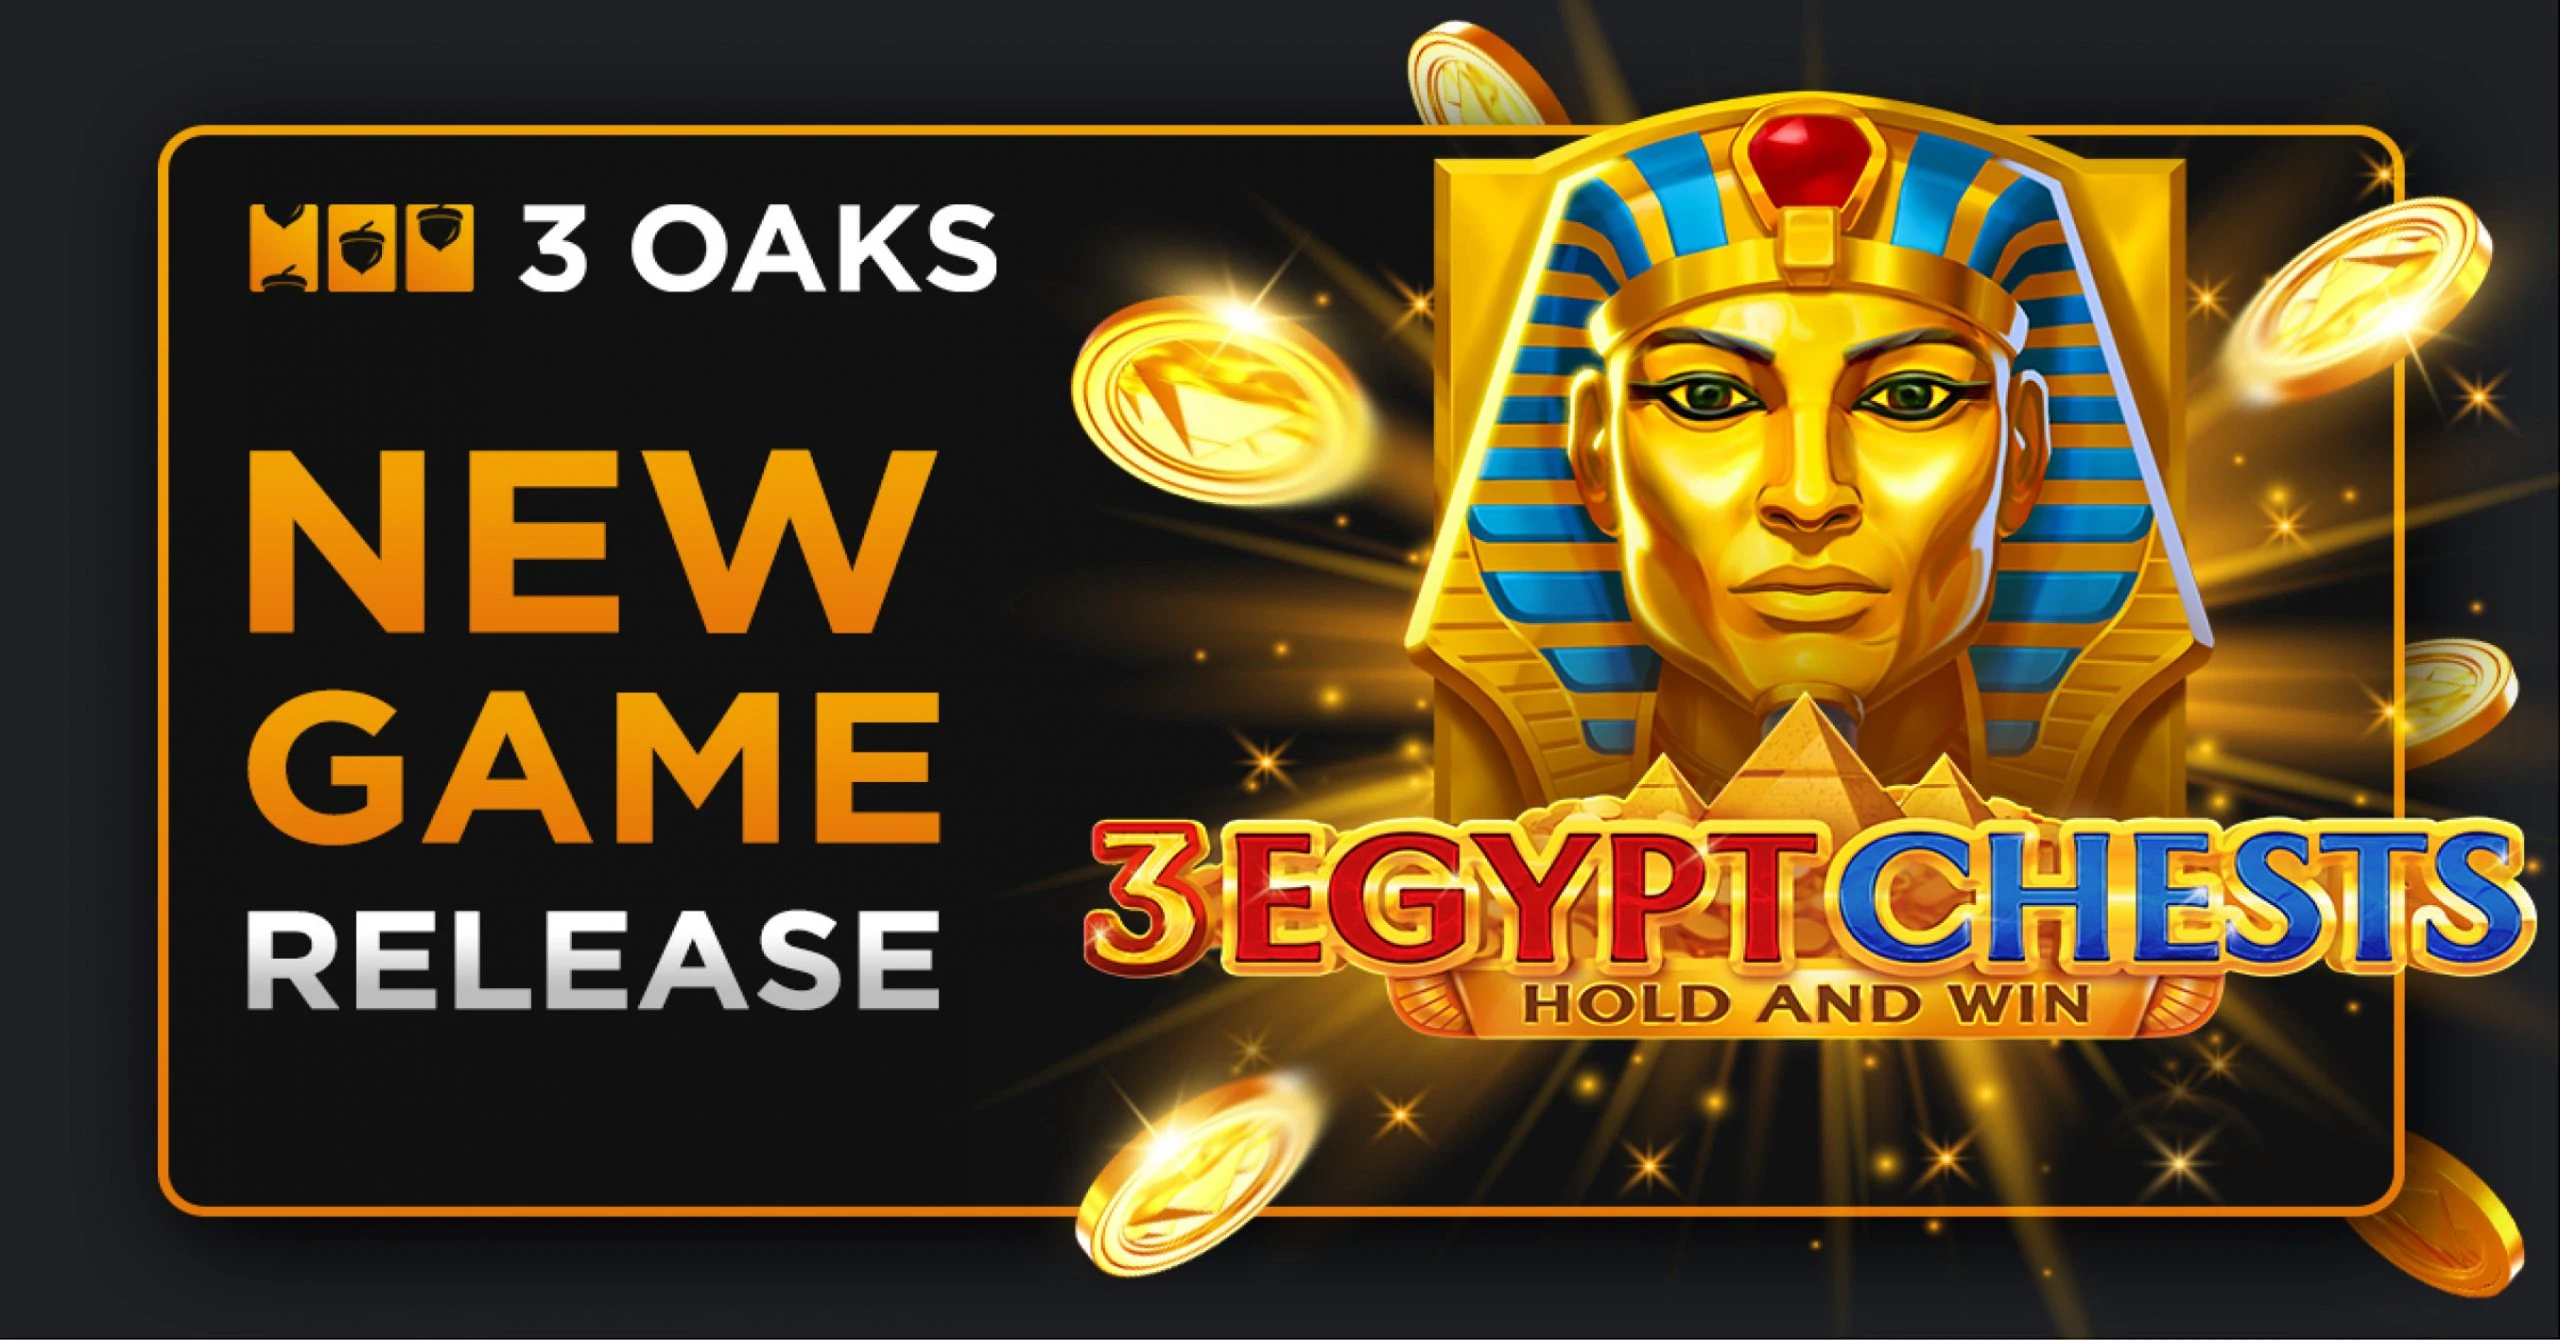 3 Egypt Chests: Hold and Win